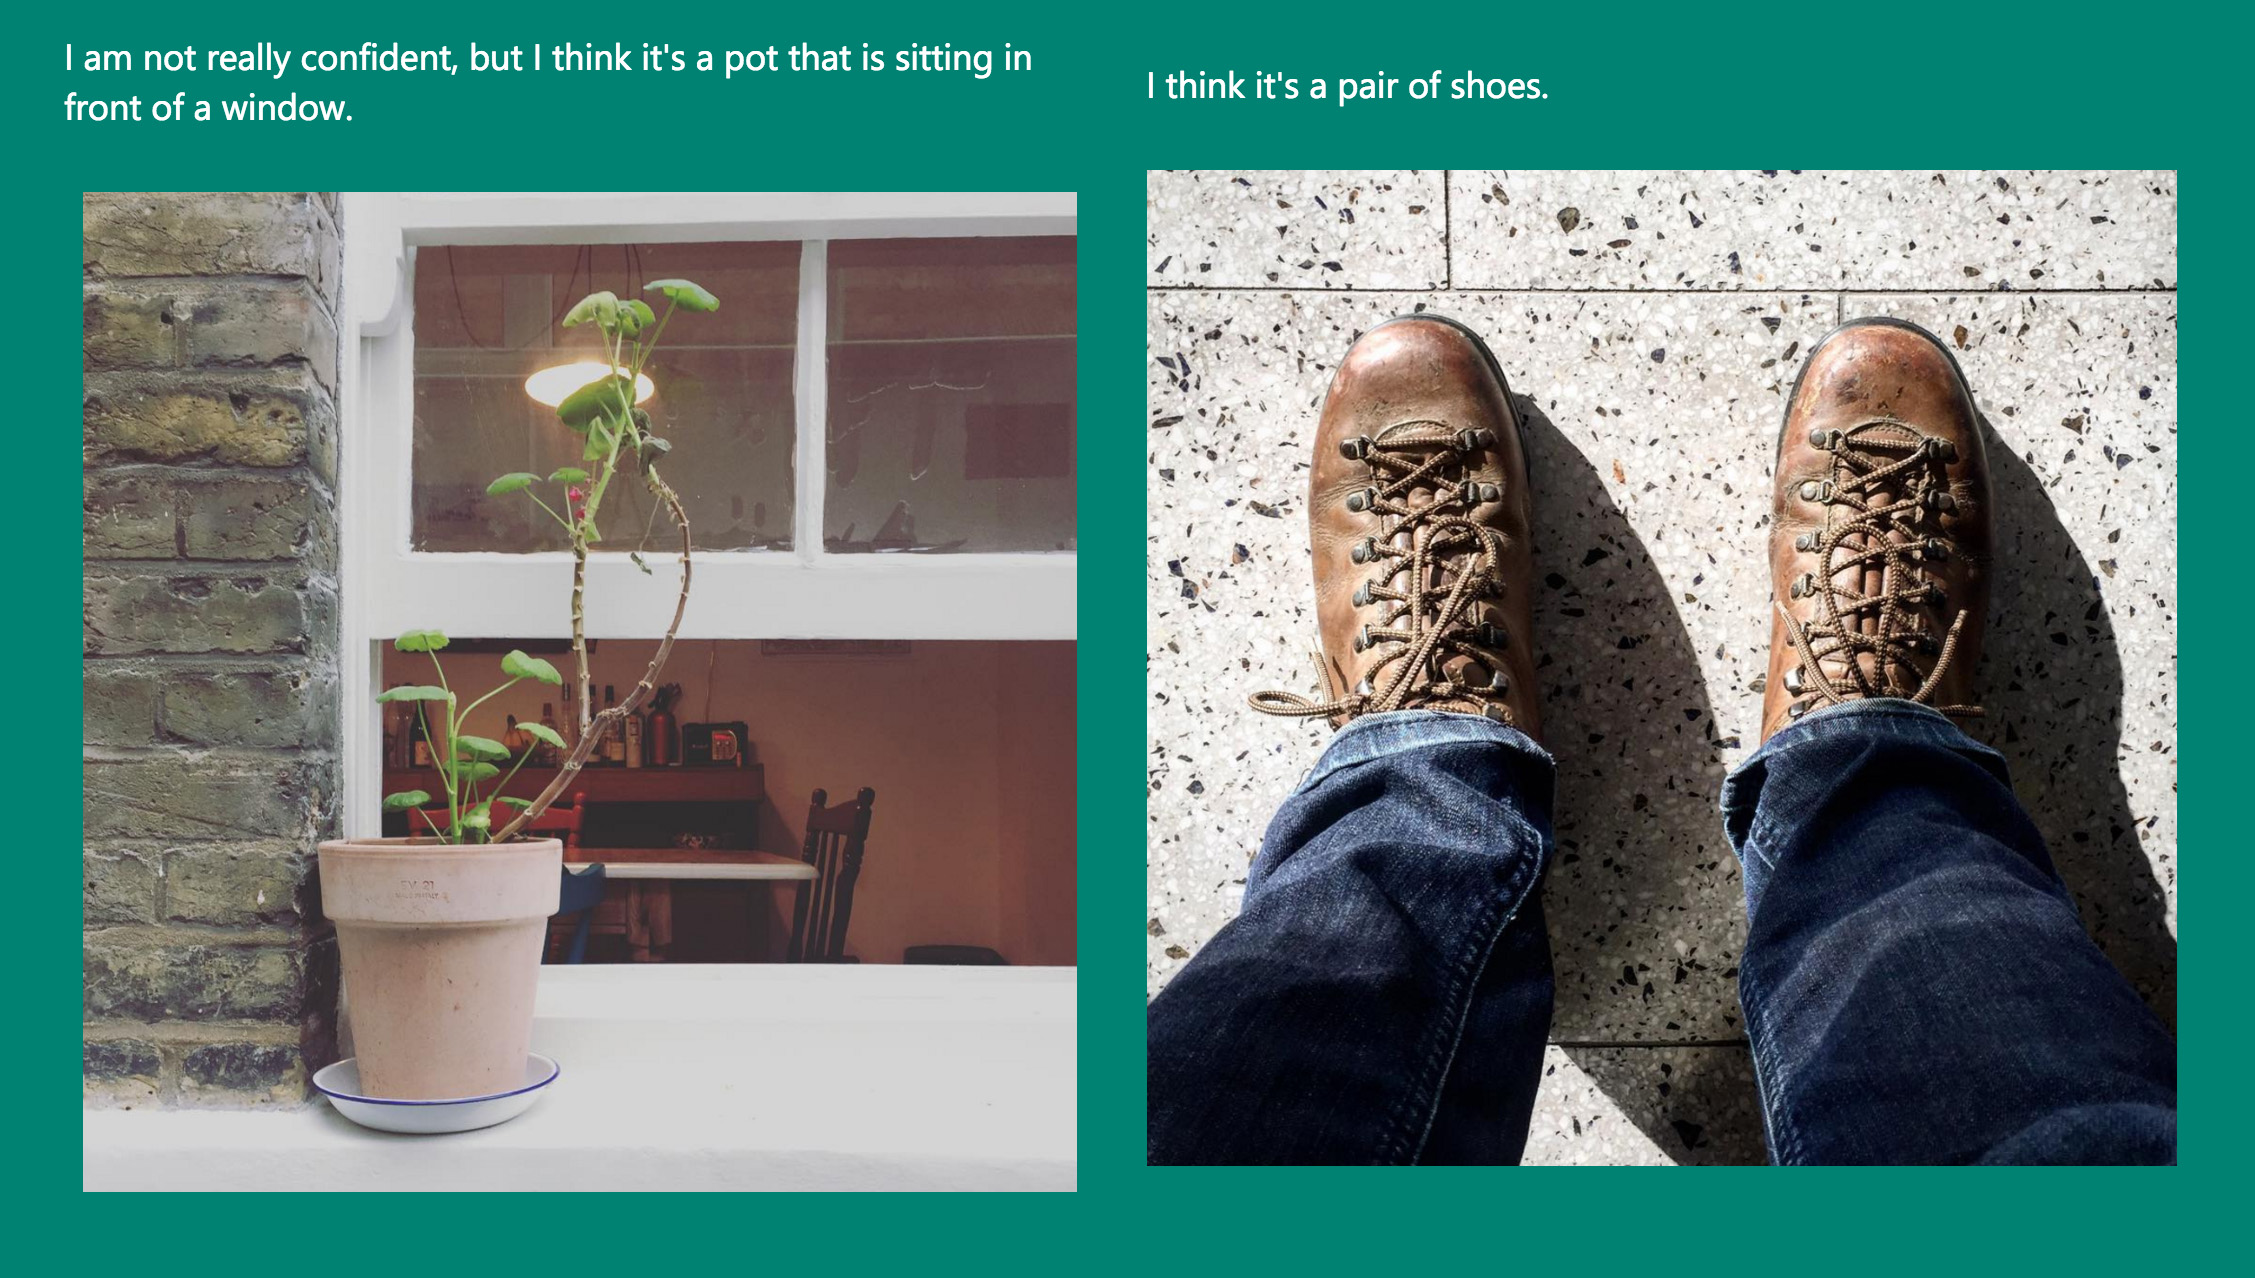 Microsoft’s New AI Writes Captions For Your Photos